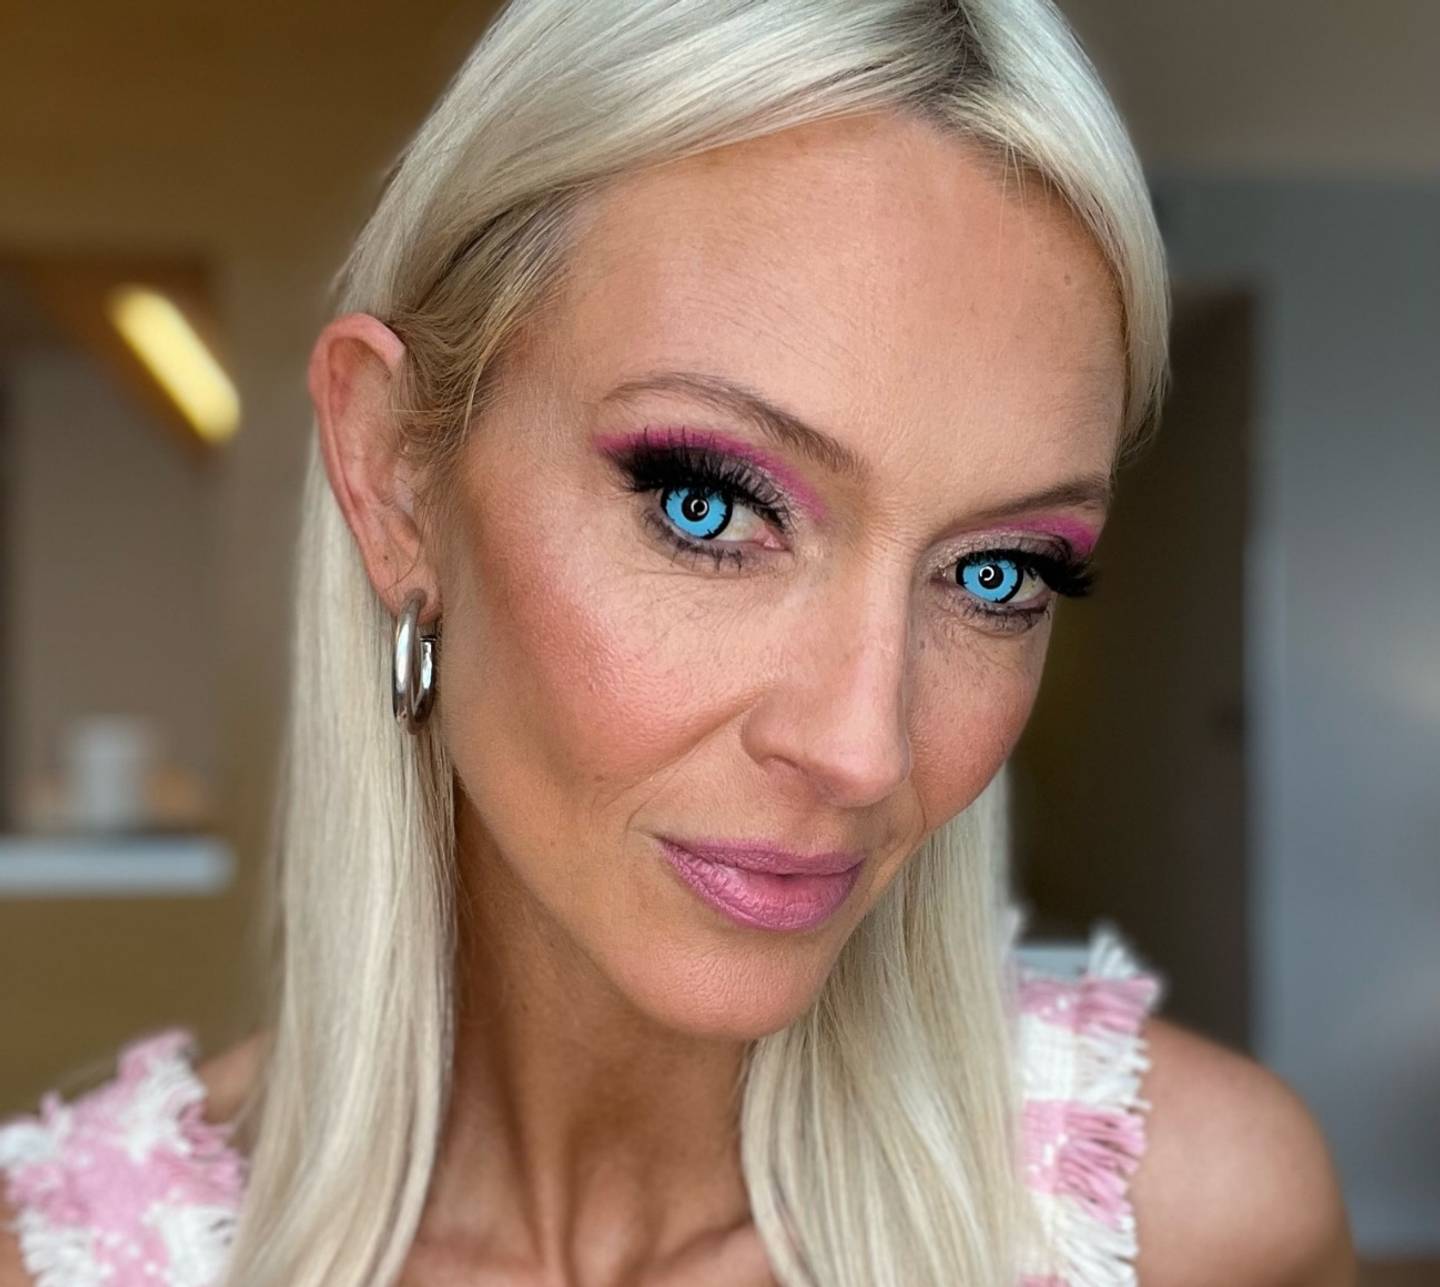 Milk Makeup cofounder Zanna Roberts-Rassi models a Barbie-inspired look done with Milk Makeup products